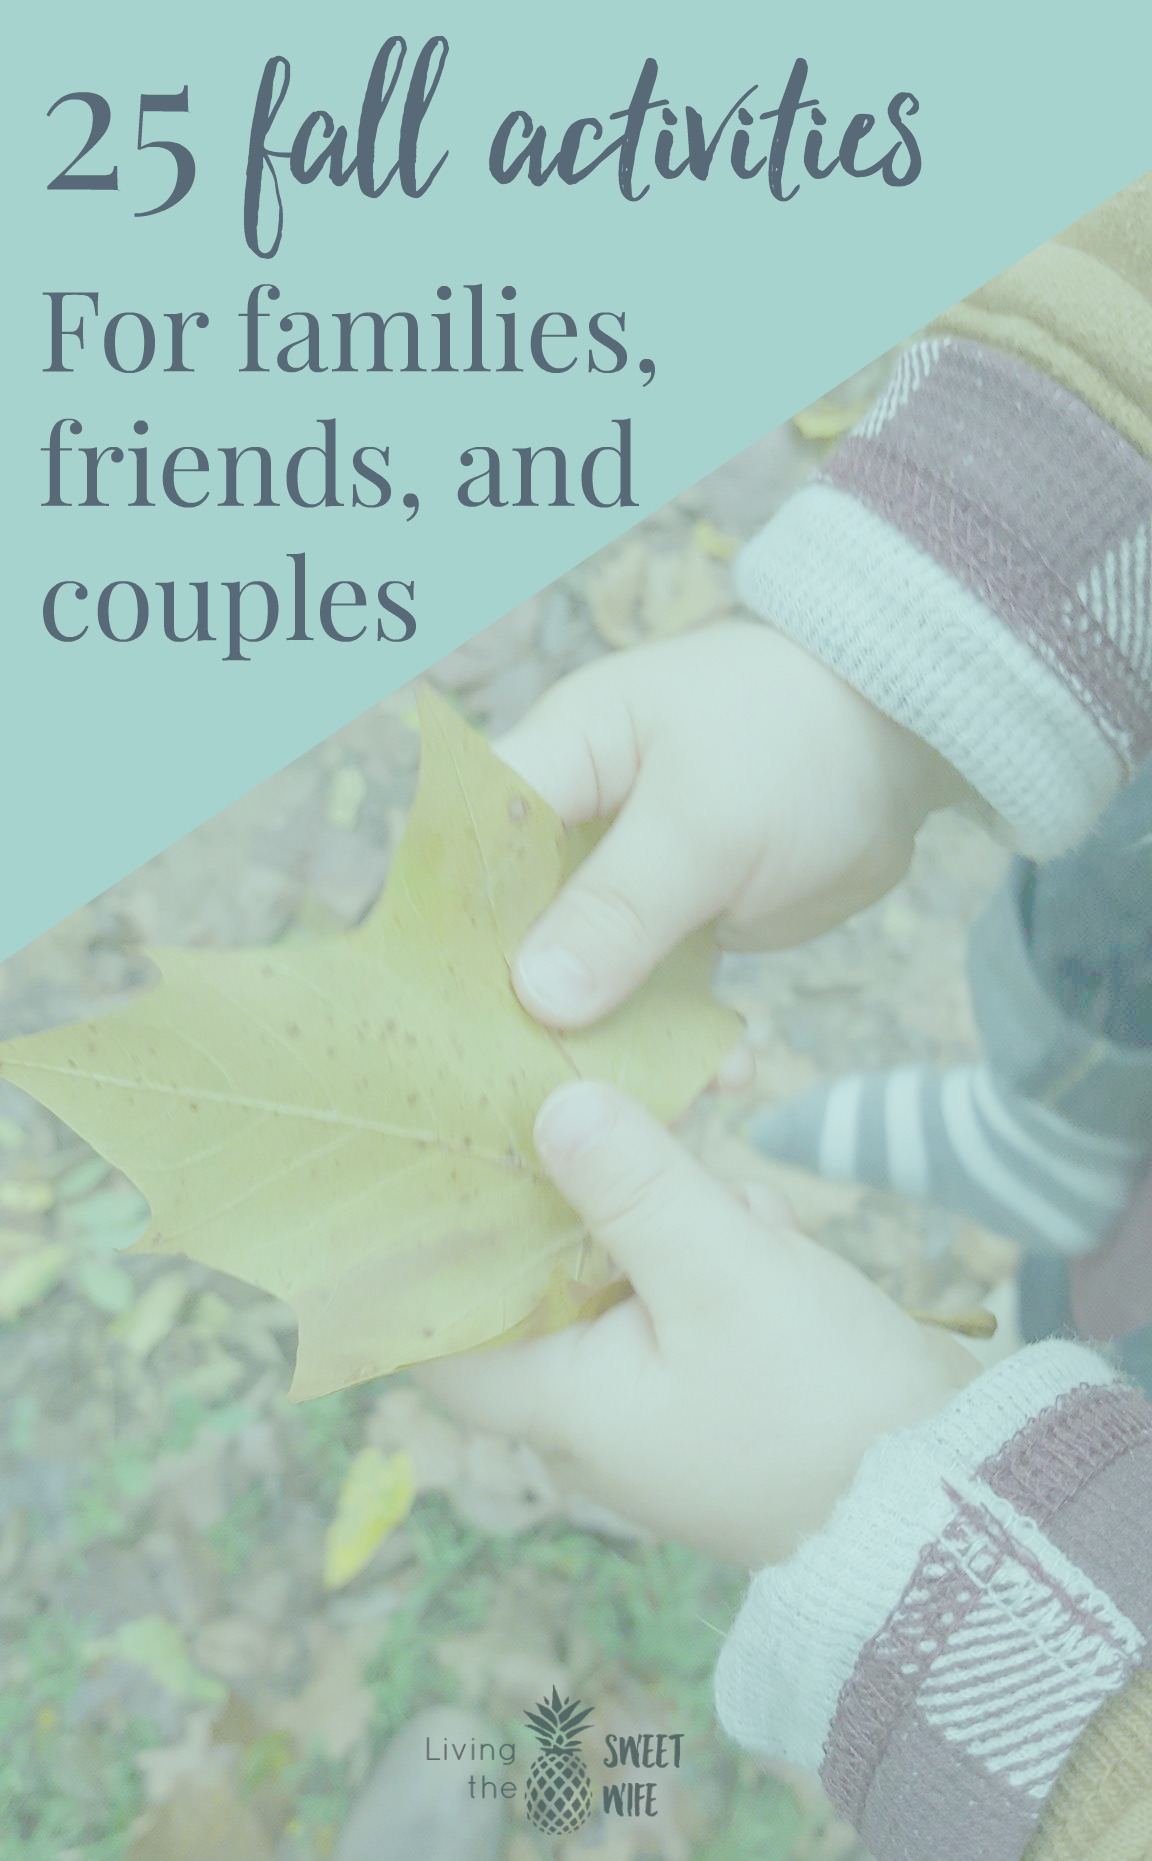 25 Fun fall activities for dates or friends Living the Sweet Wife